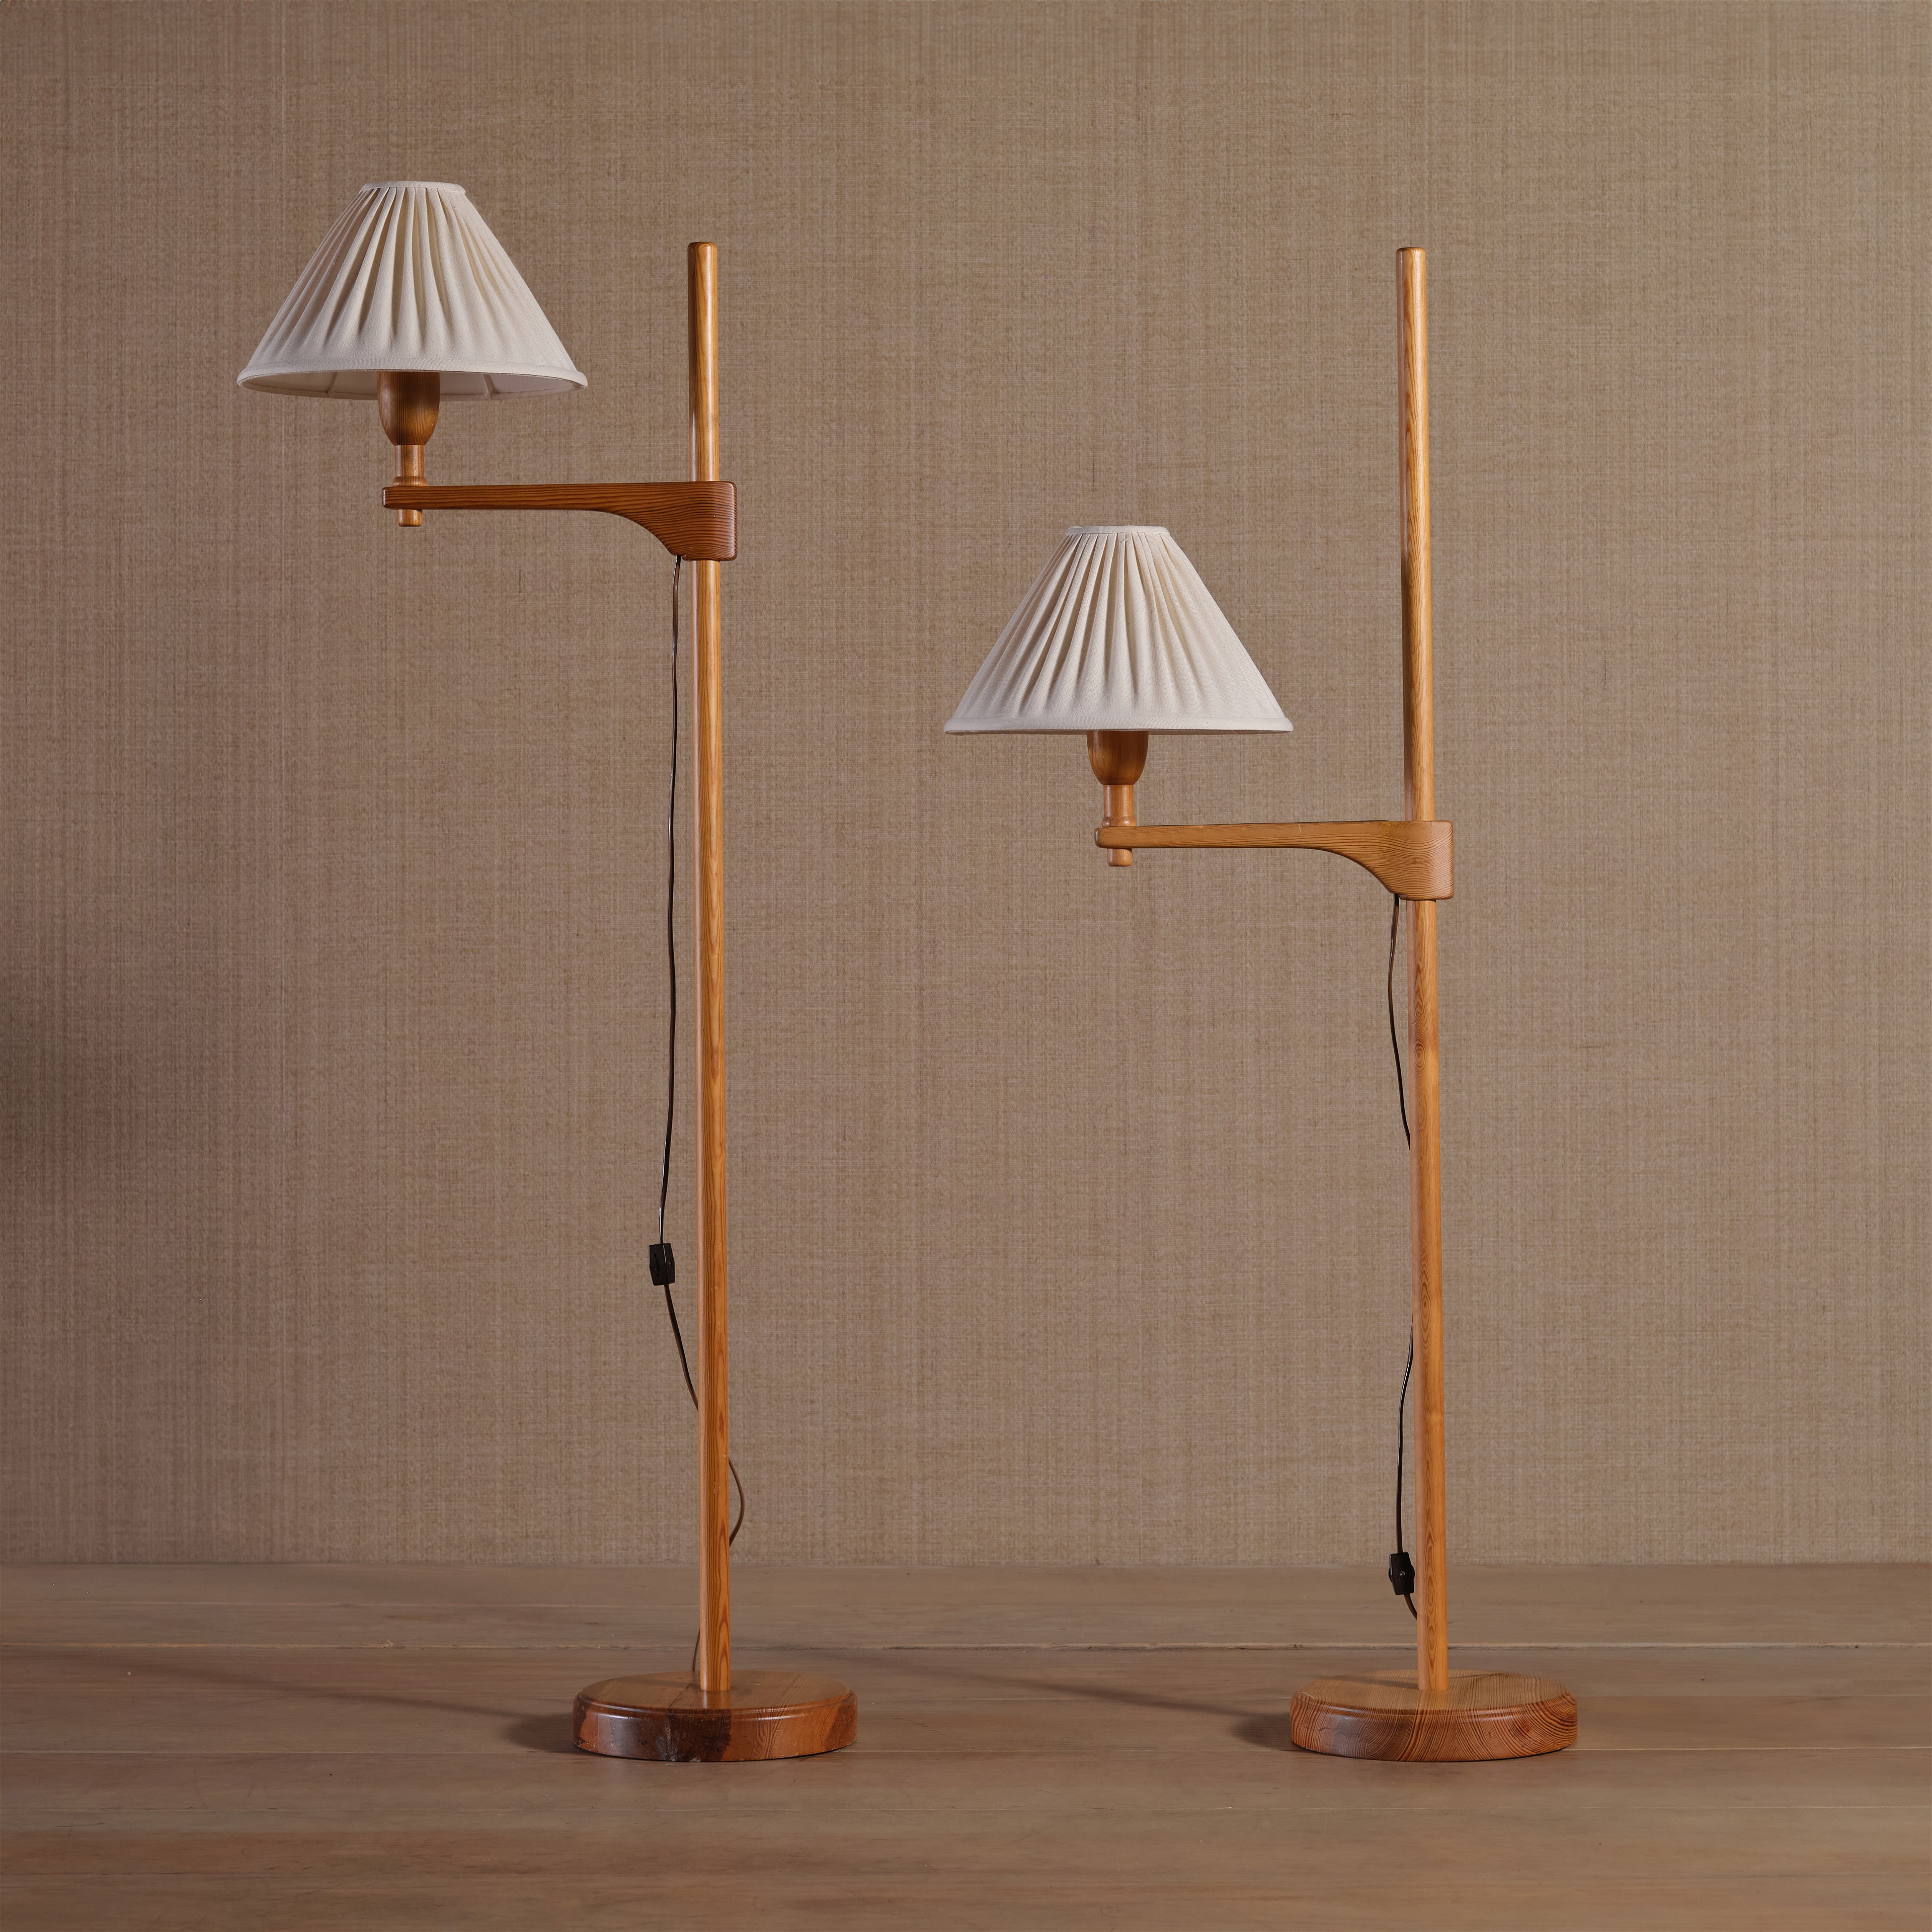 a couple of lamps sitting on top of a wooden floor